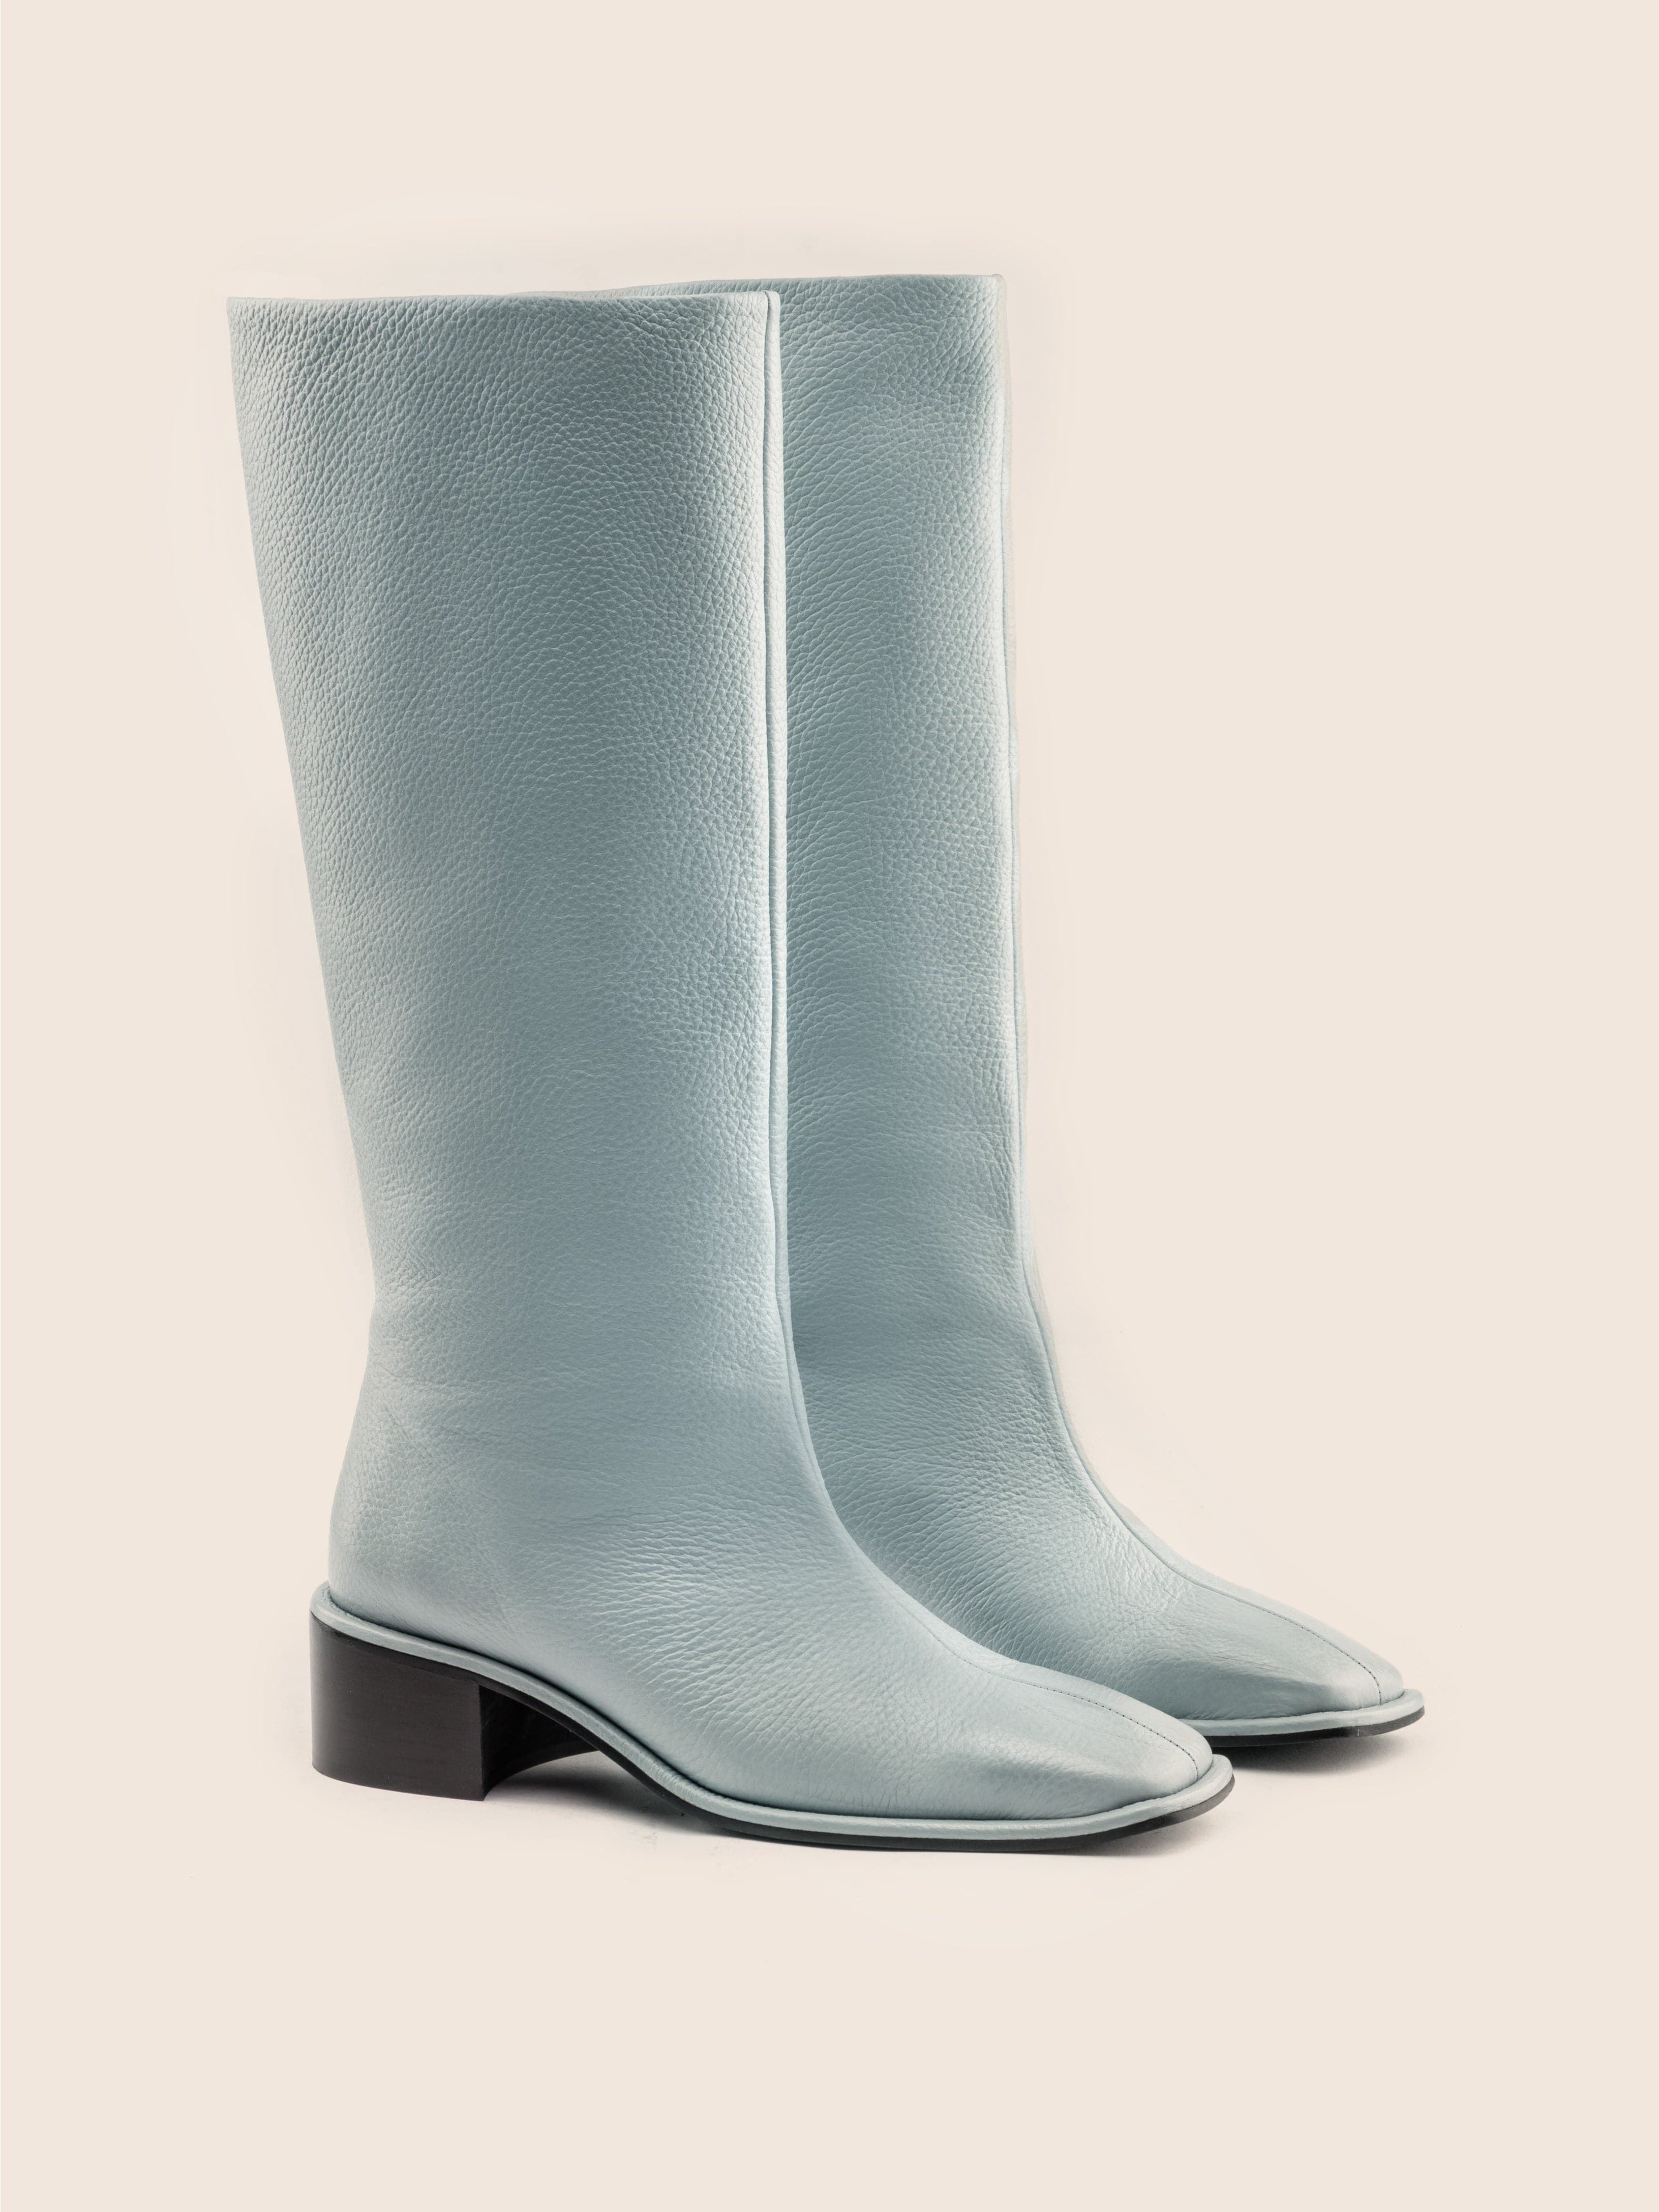 Maguire Carmona Leather Knee-High Boots - Denim